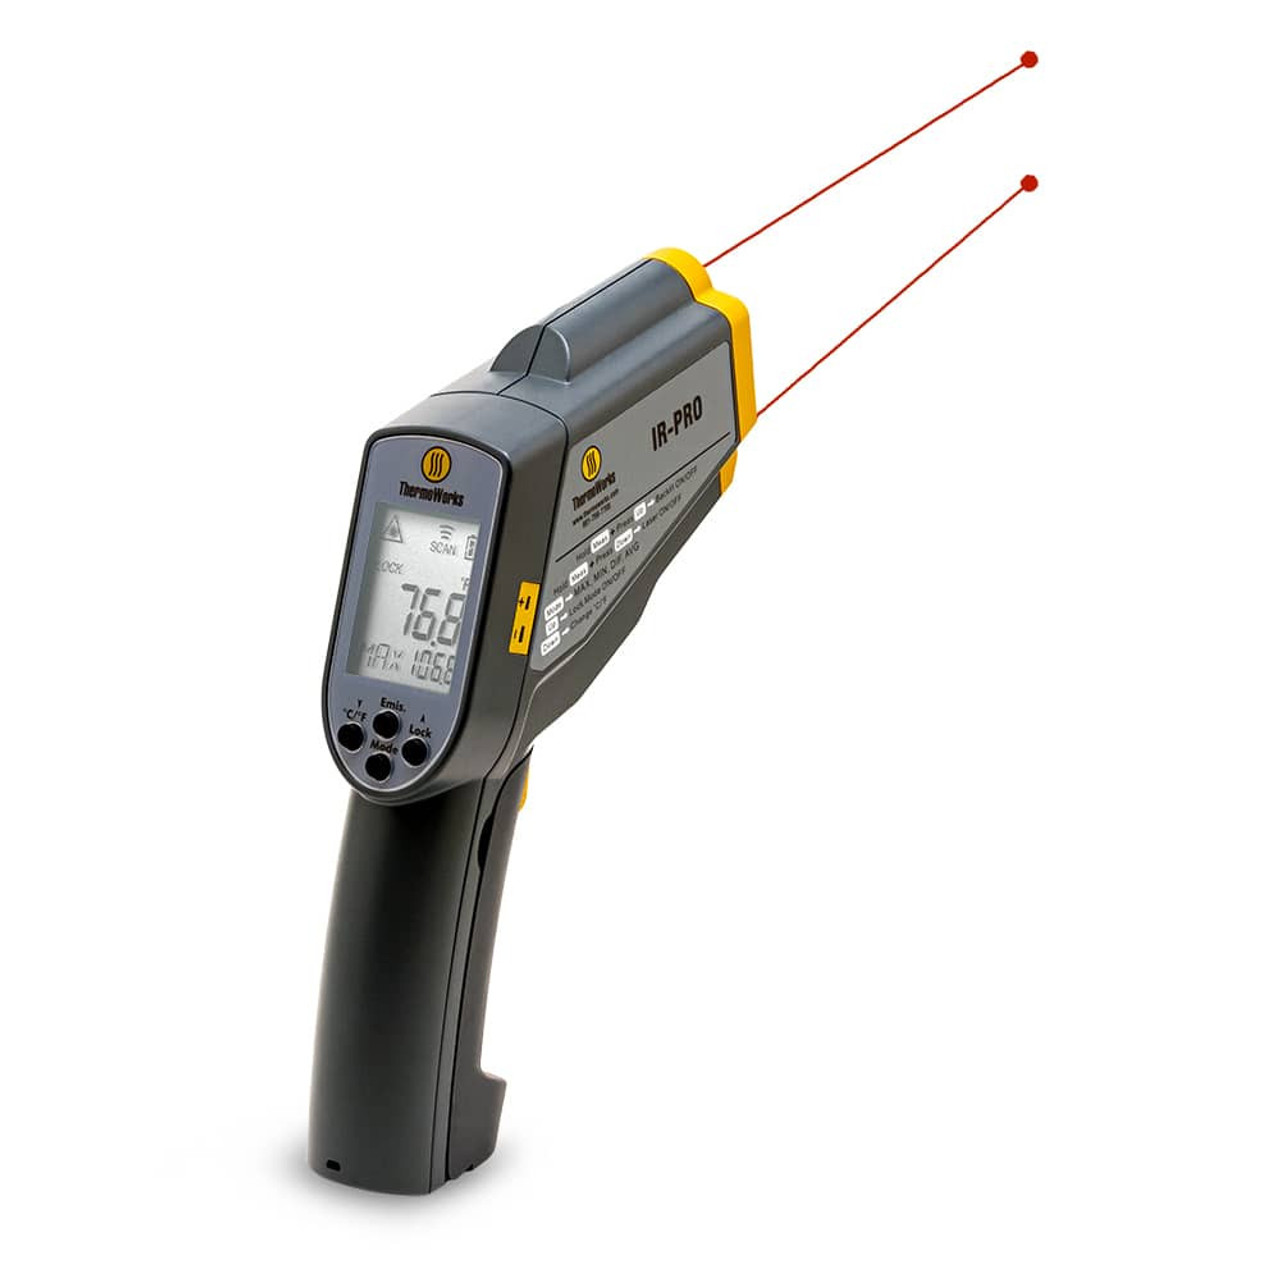 Infrared thermometer gun  How it works, Application & Advantages